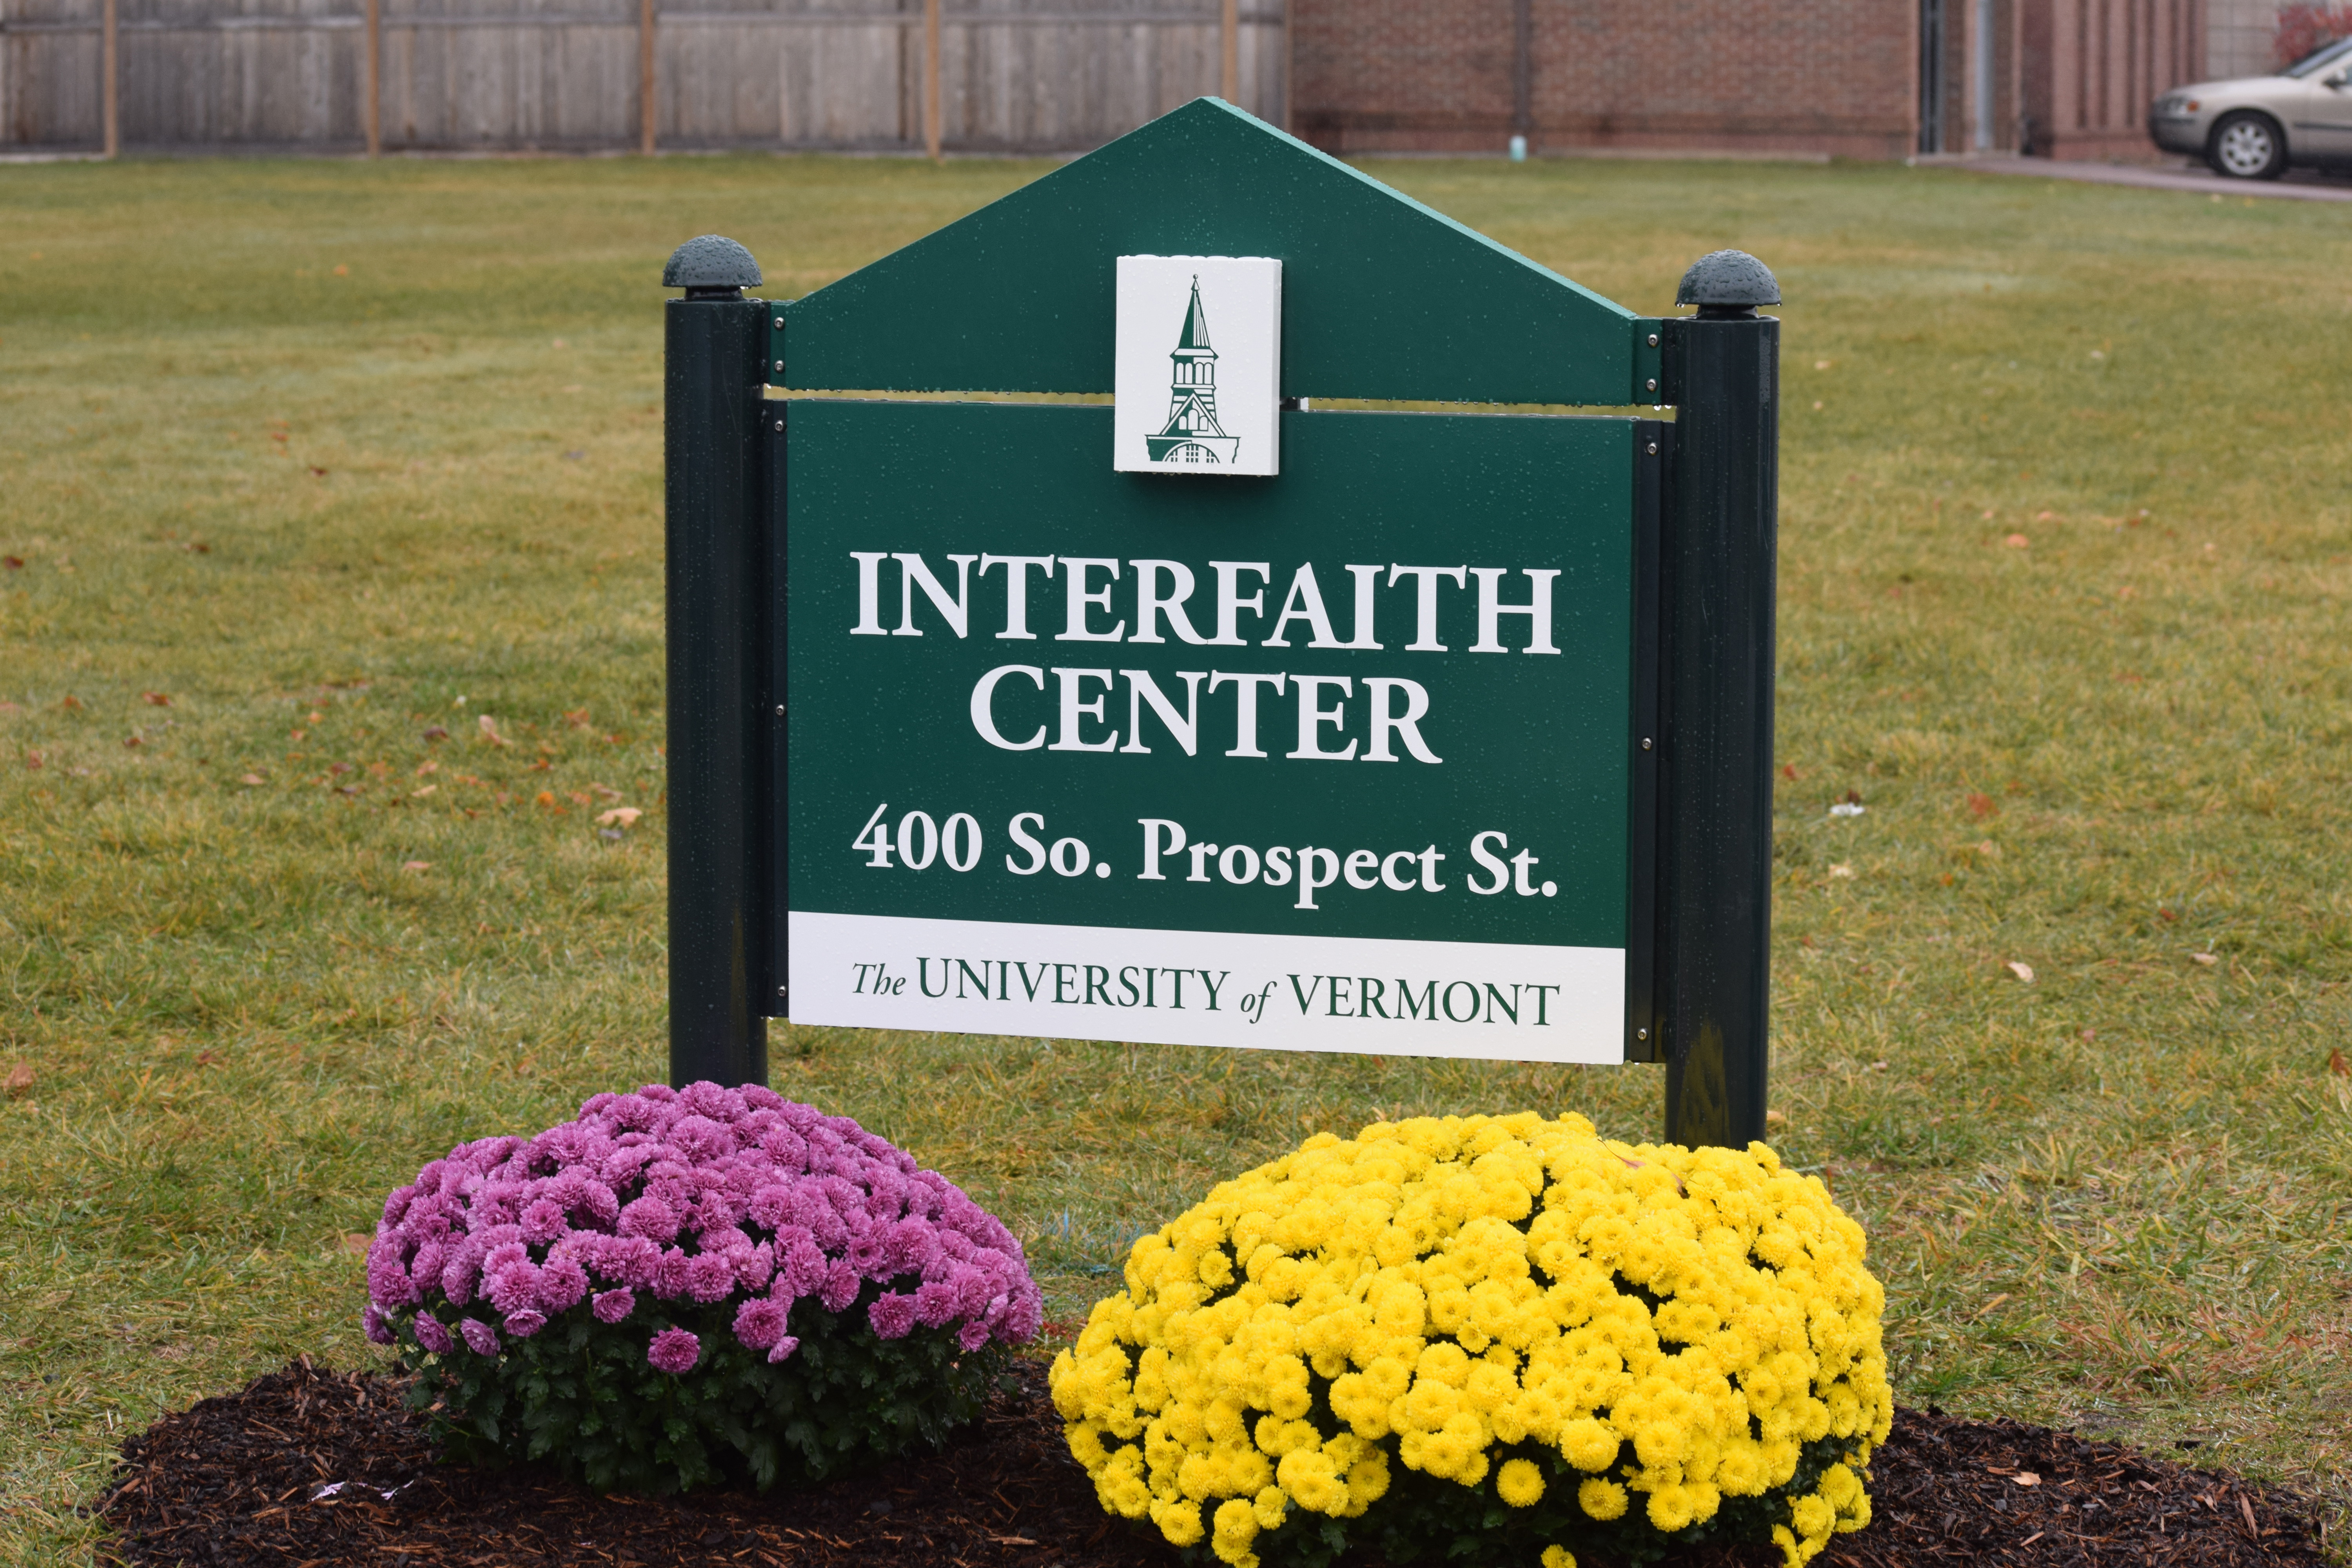 The Interfaith Center is located at 400 South Prospect Street